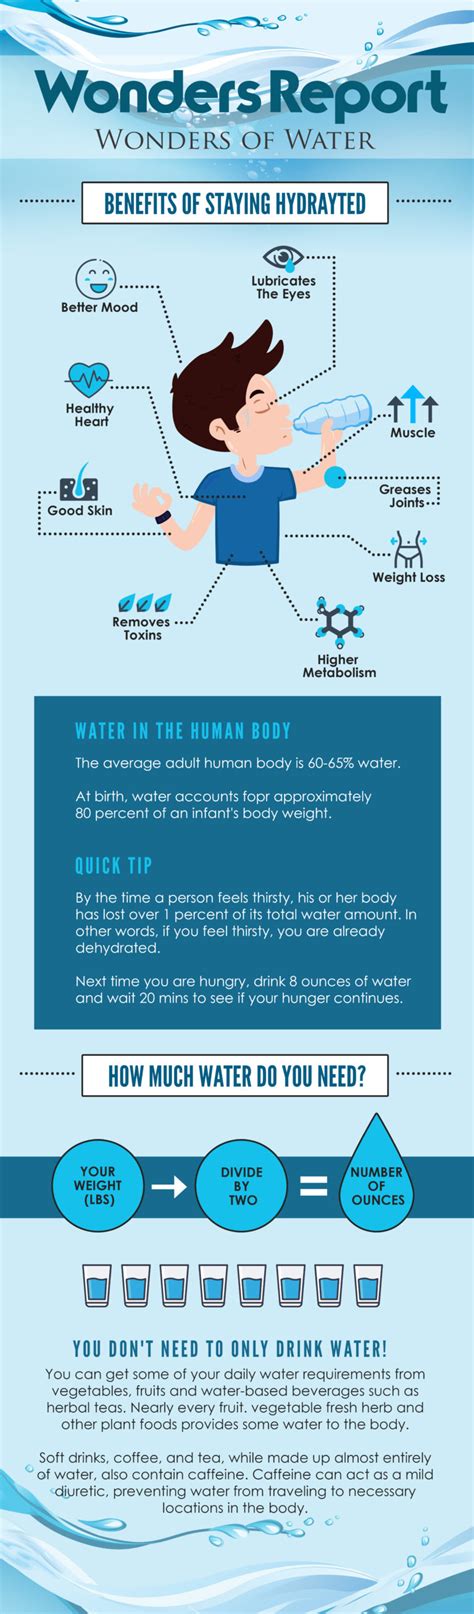 Benefits Of Staying Hydrated Infographic